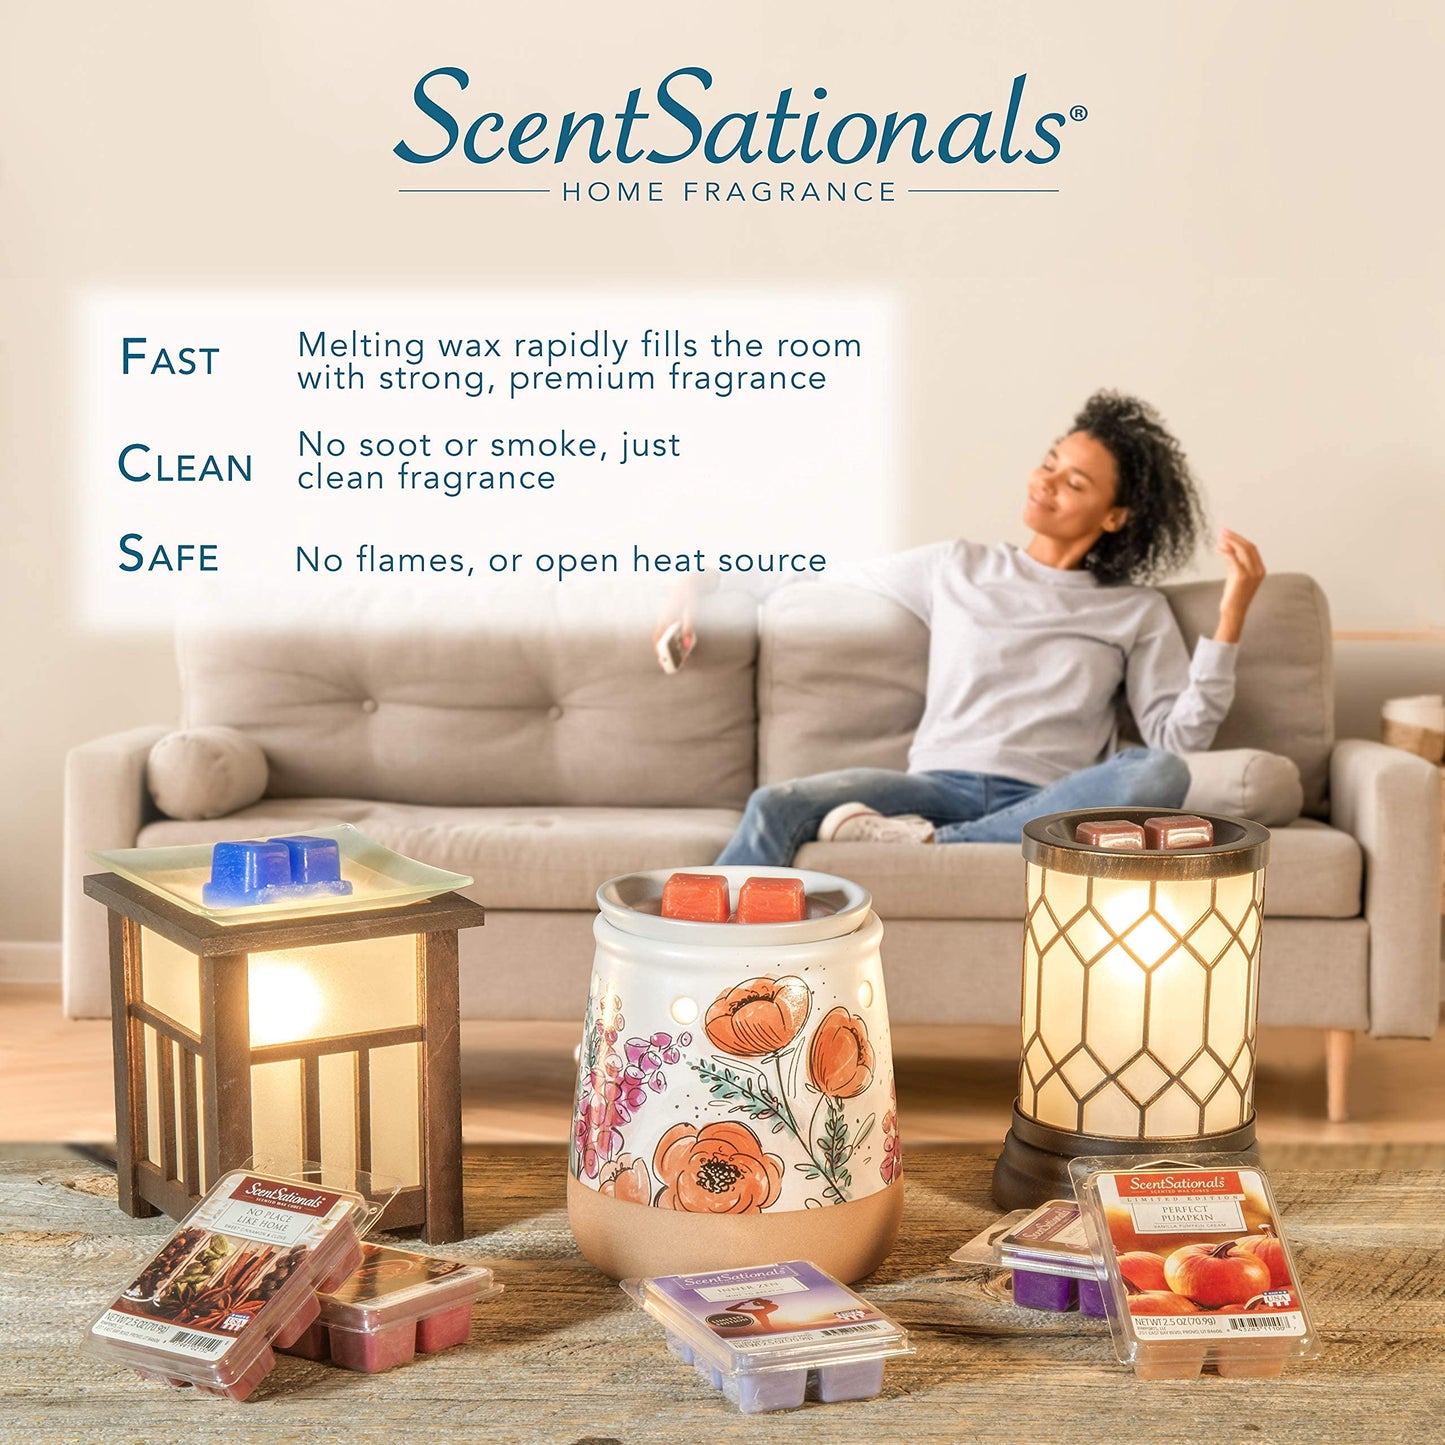 ScentSationals Wax Warmer Boho Collection, Scented Wax Cube Melter, Oil Diffuser Electric Fragrance and Oil Burner, Wickless Candle Air Freshener, Indoor Home Decor, House Decoration Year Round (Succulent Bowl)